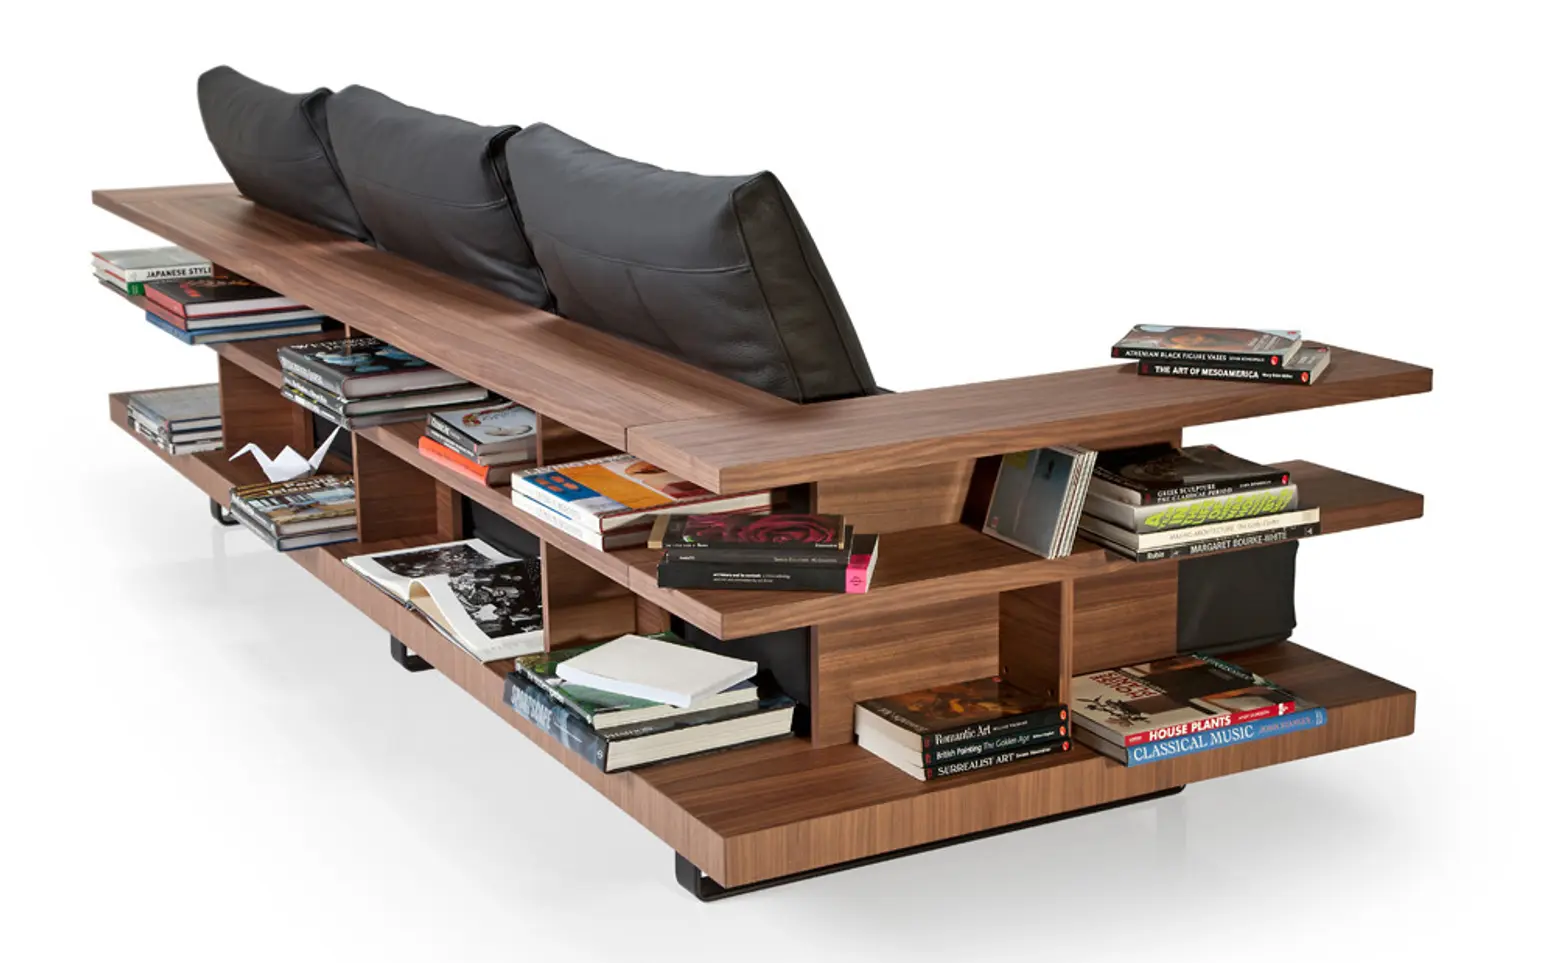 The Gazel Sofa Features a Wrap-Around Shelving Unit Perfect for Space-Starved New Yorkers